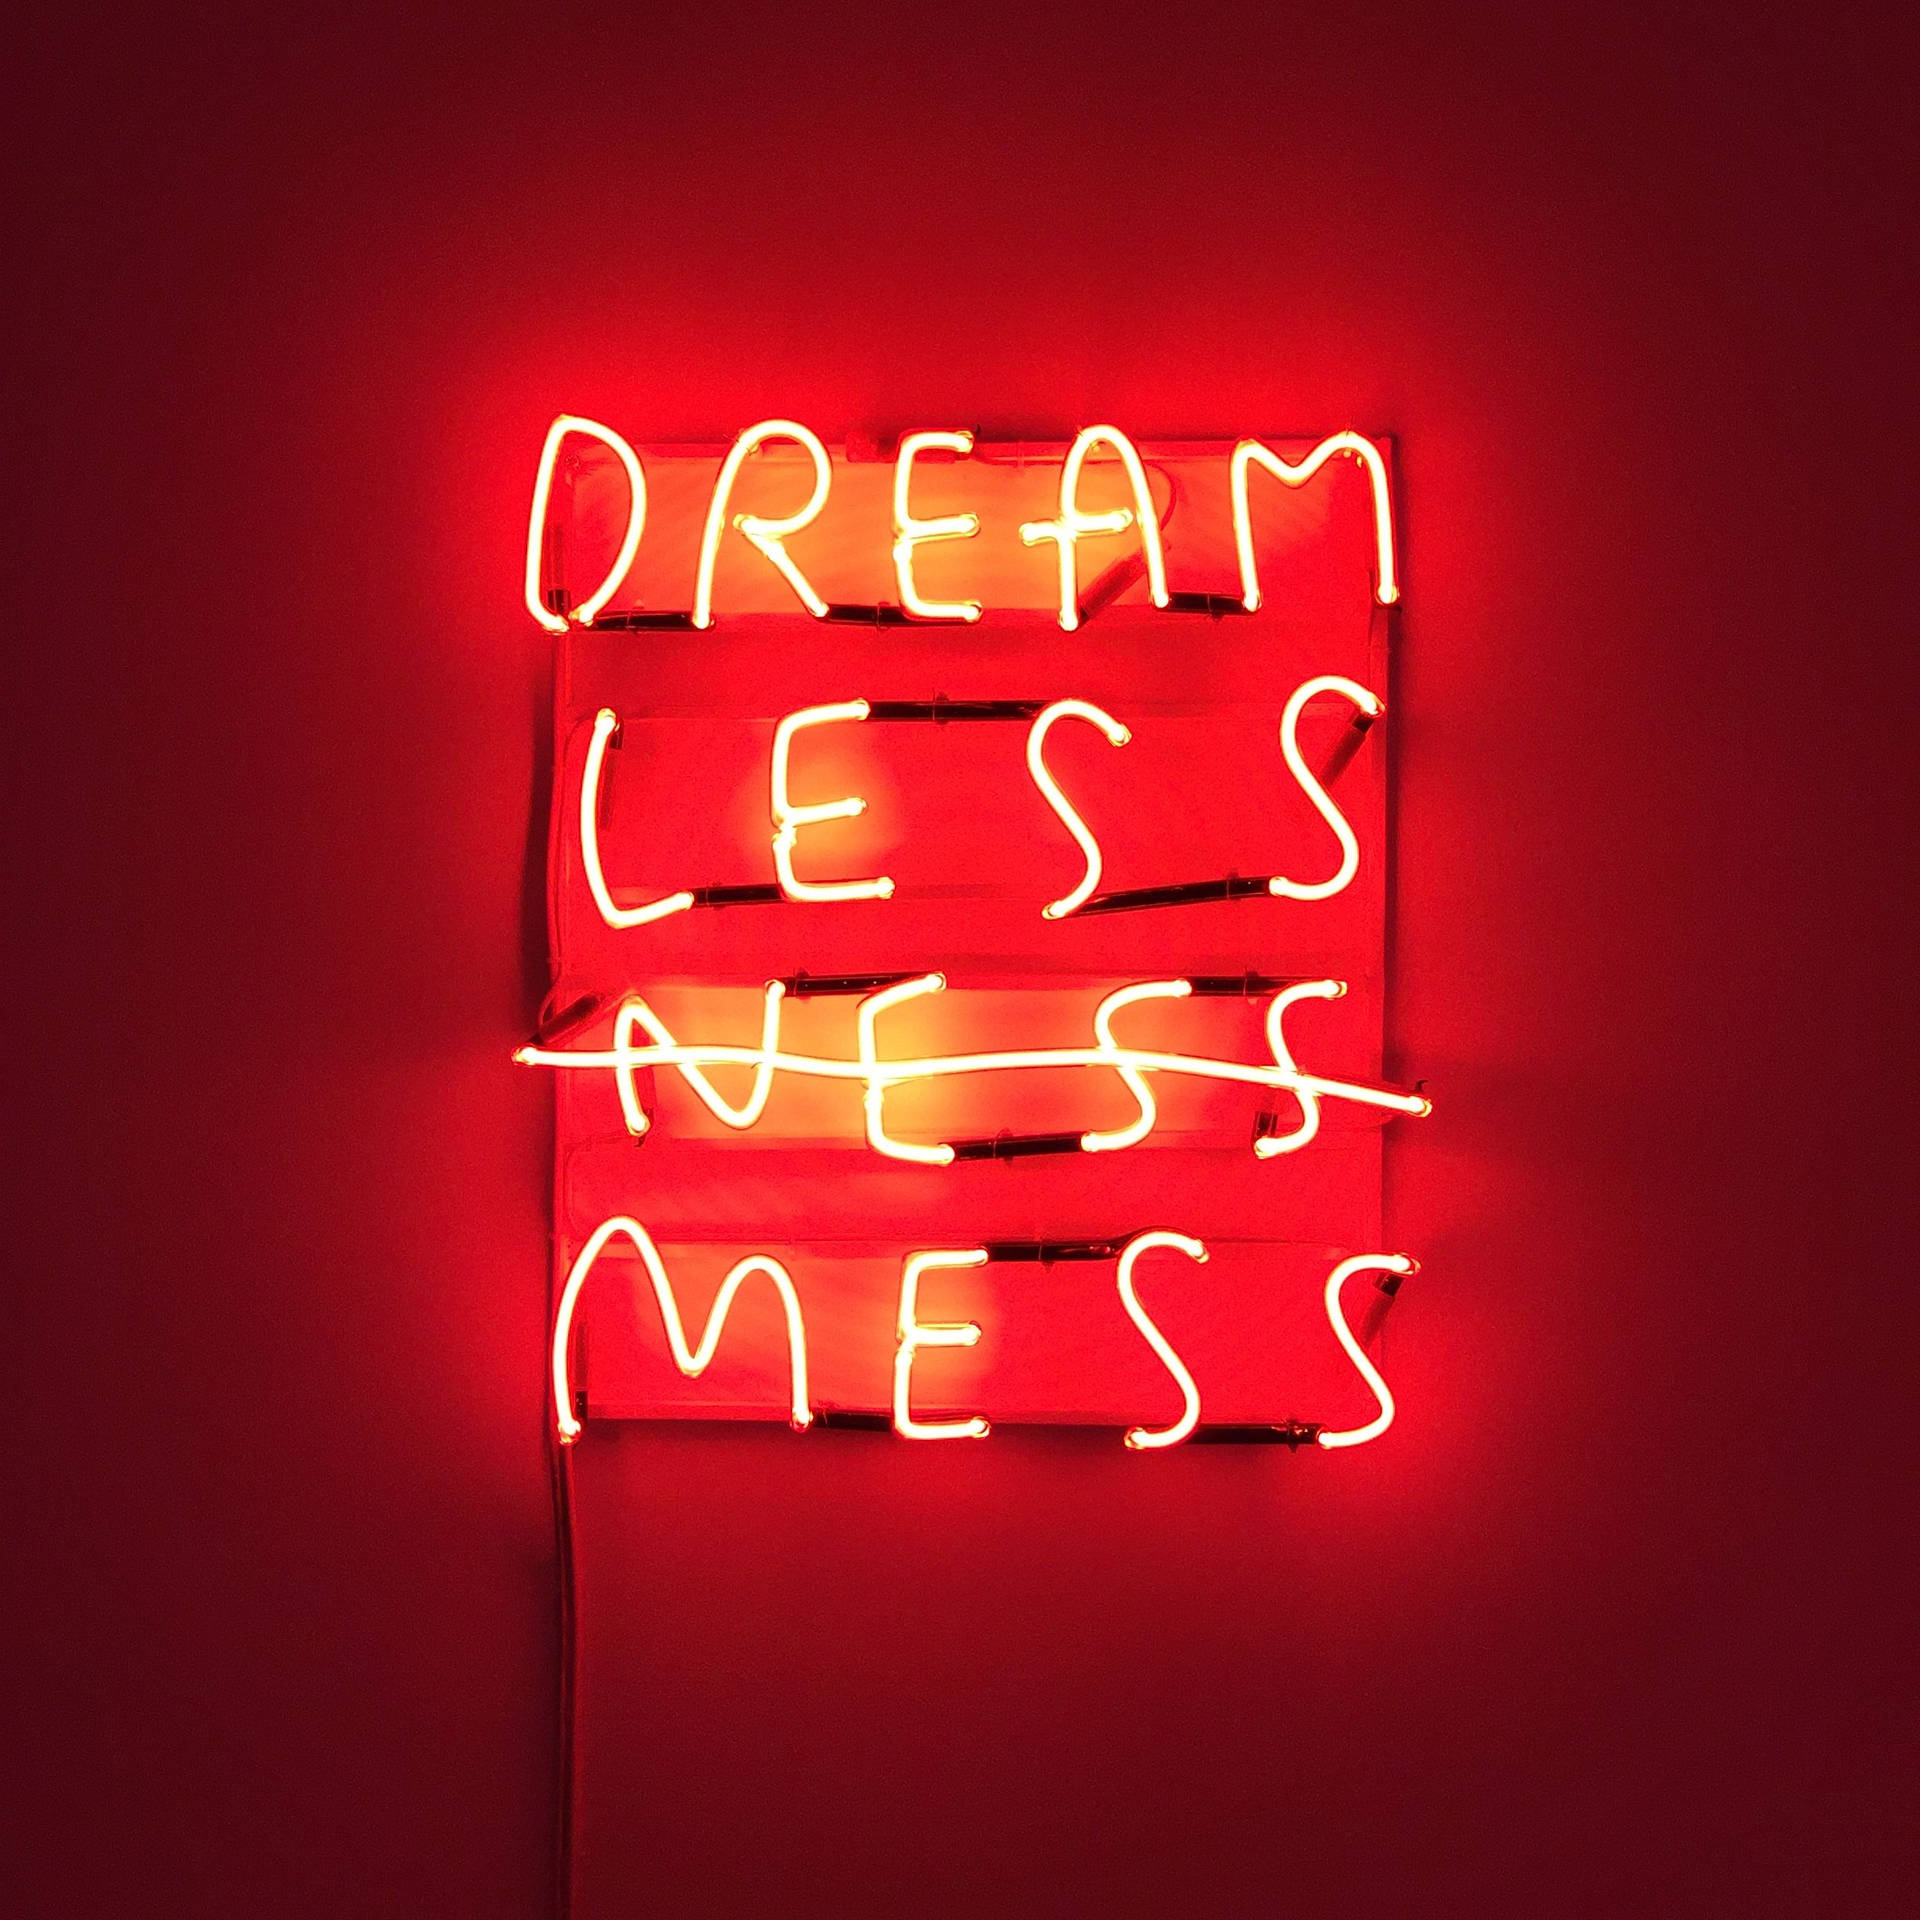 Red Aesthetic Neon Dream Less Mess Background